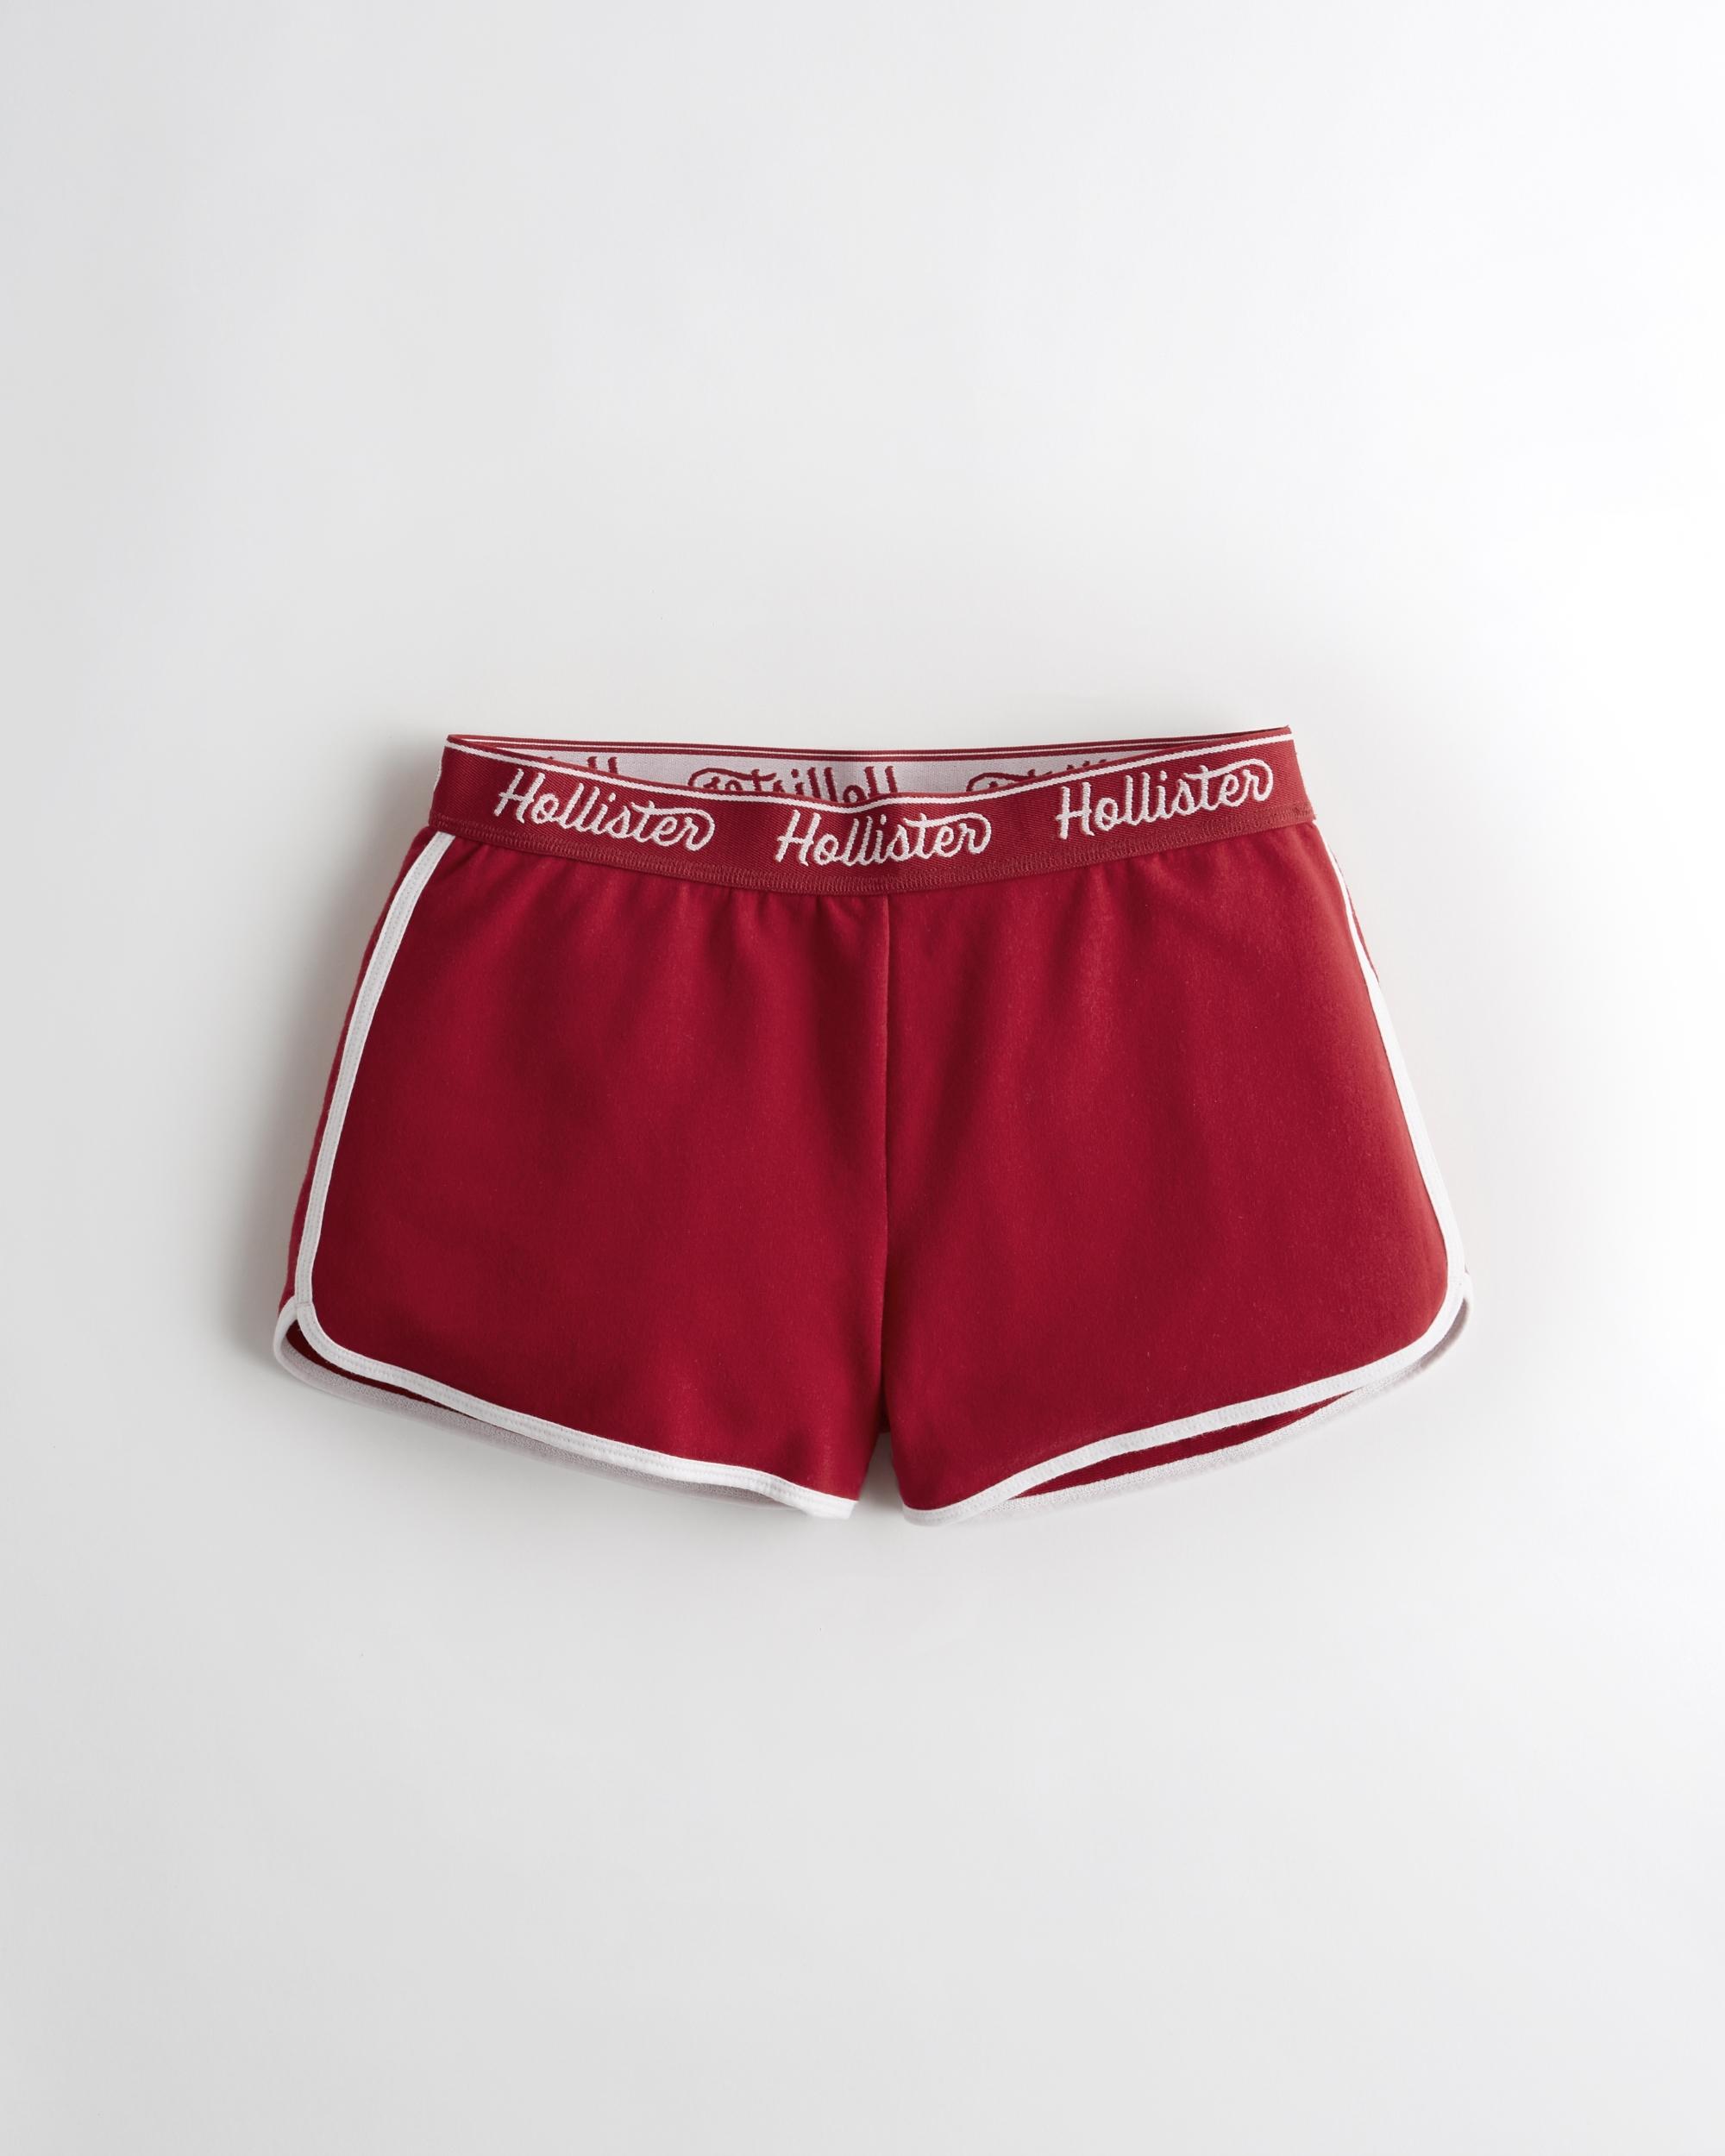 hollister red shorts